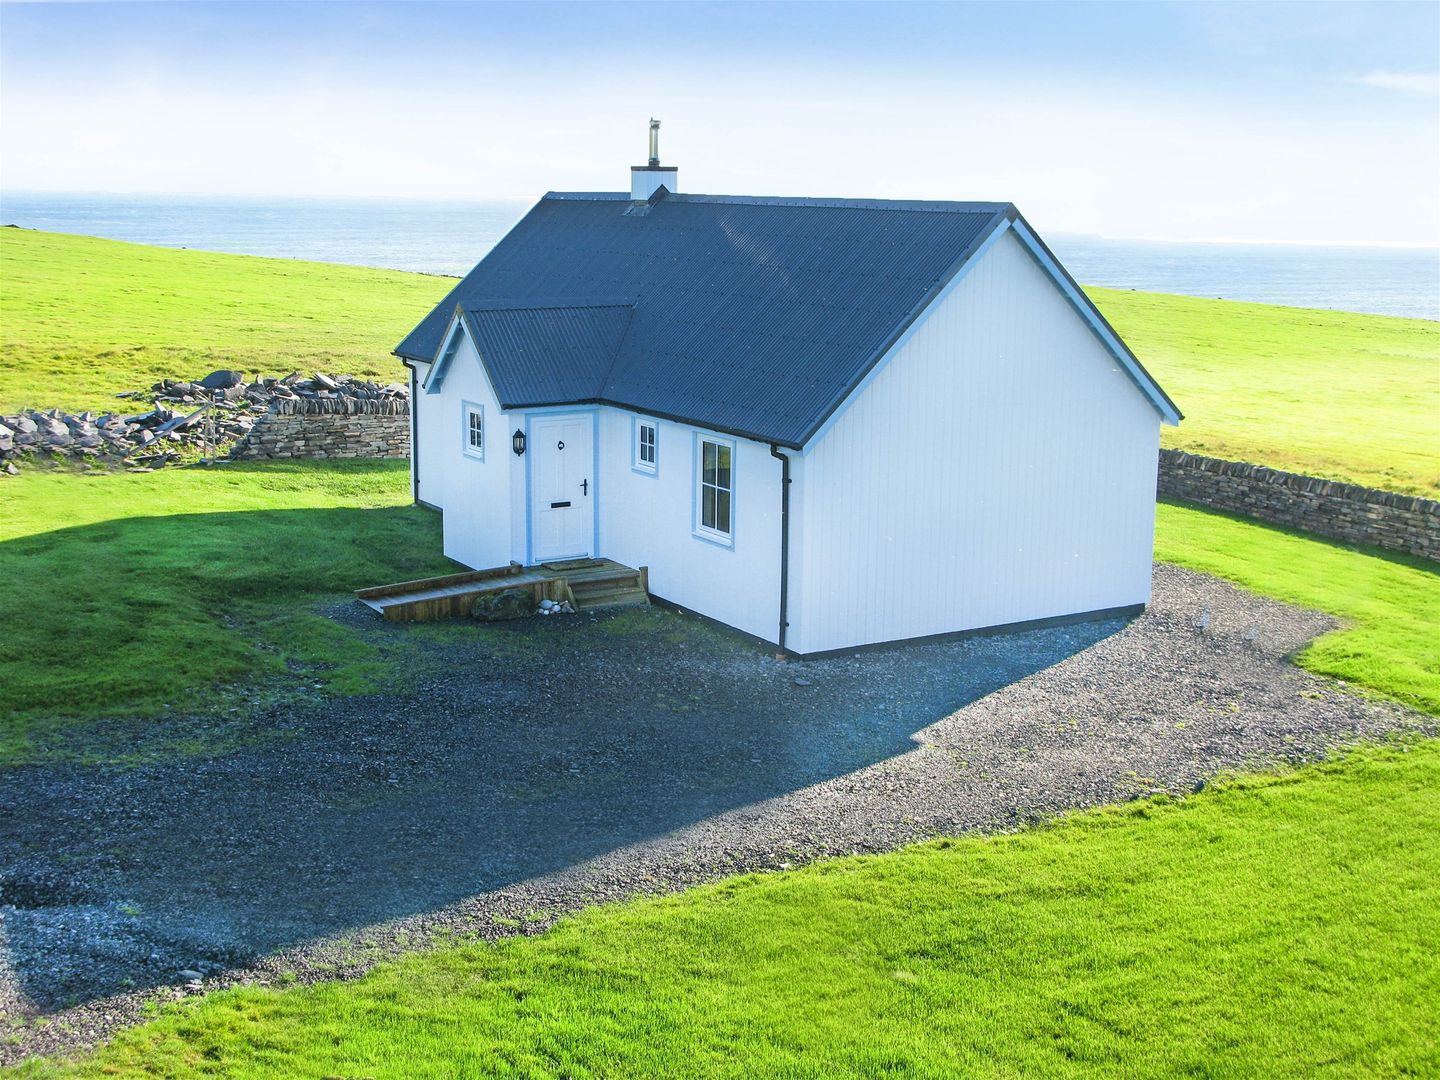 Two Bedroom Wee House - Caithness , The Wee House Company The Wee House Company Casas de estilo clásico